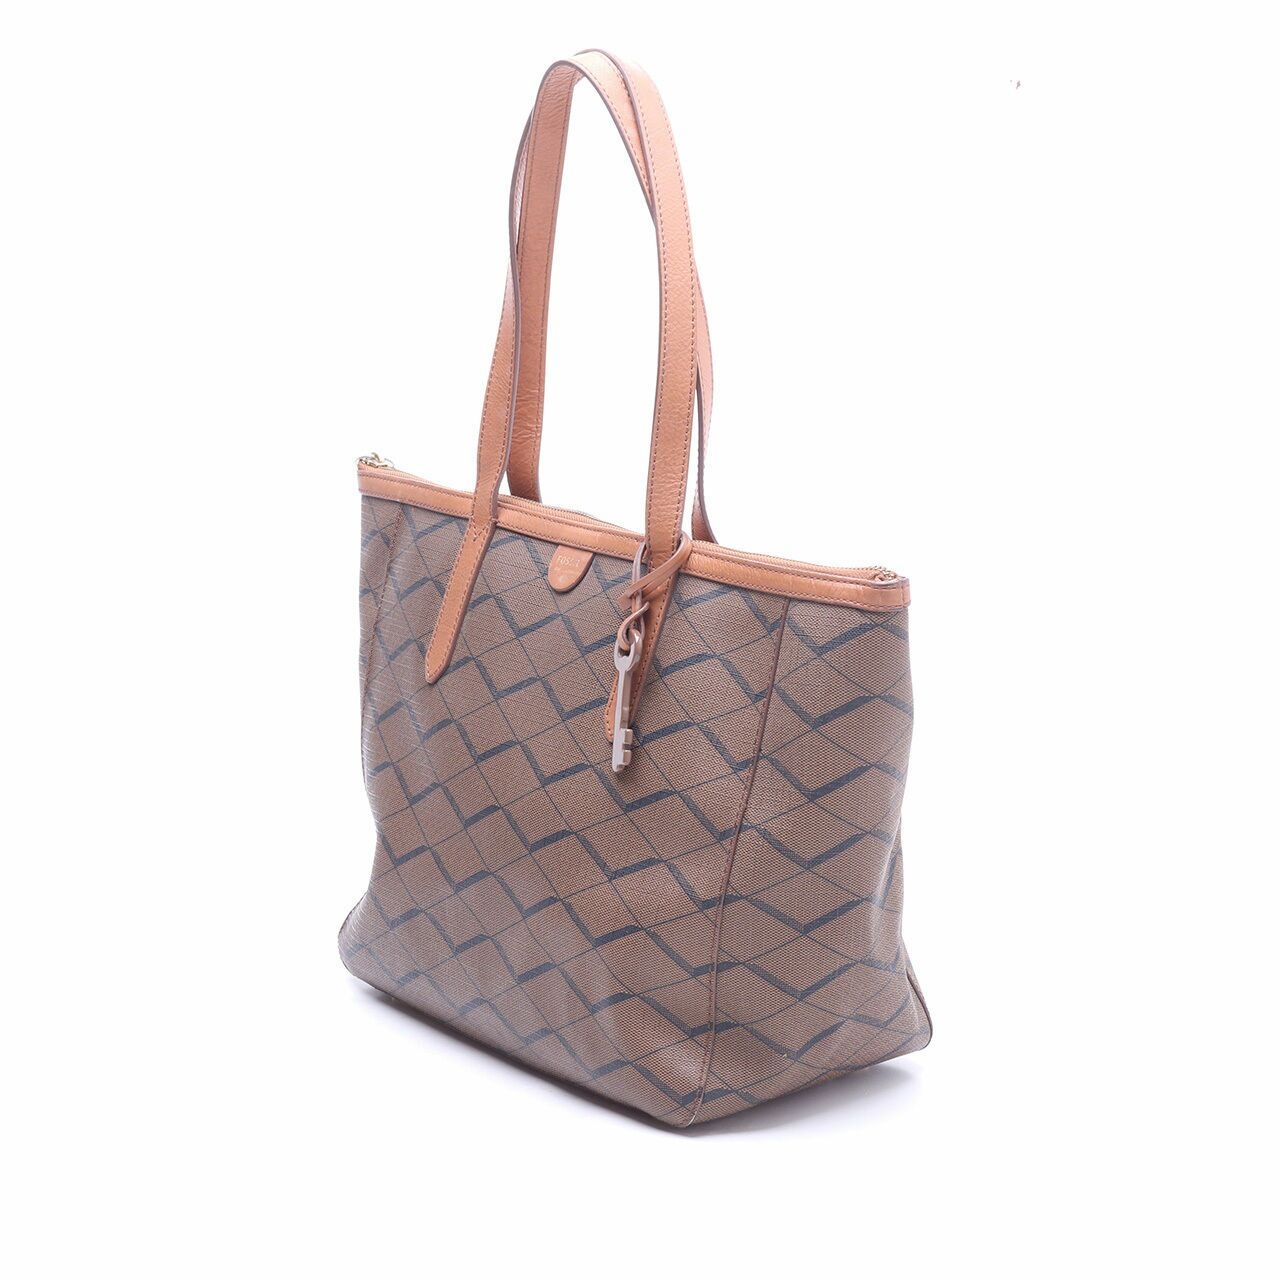 Fossil Accessories Sydney Brown Tote Bag